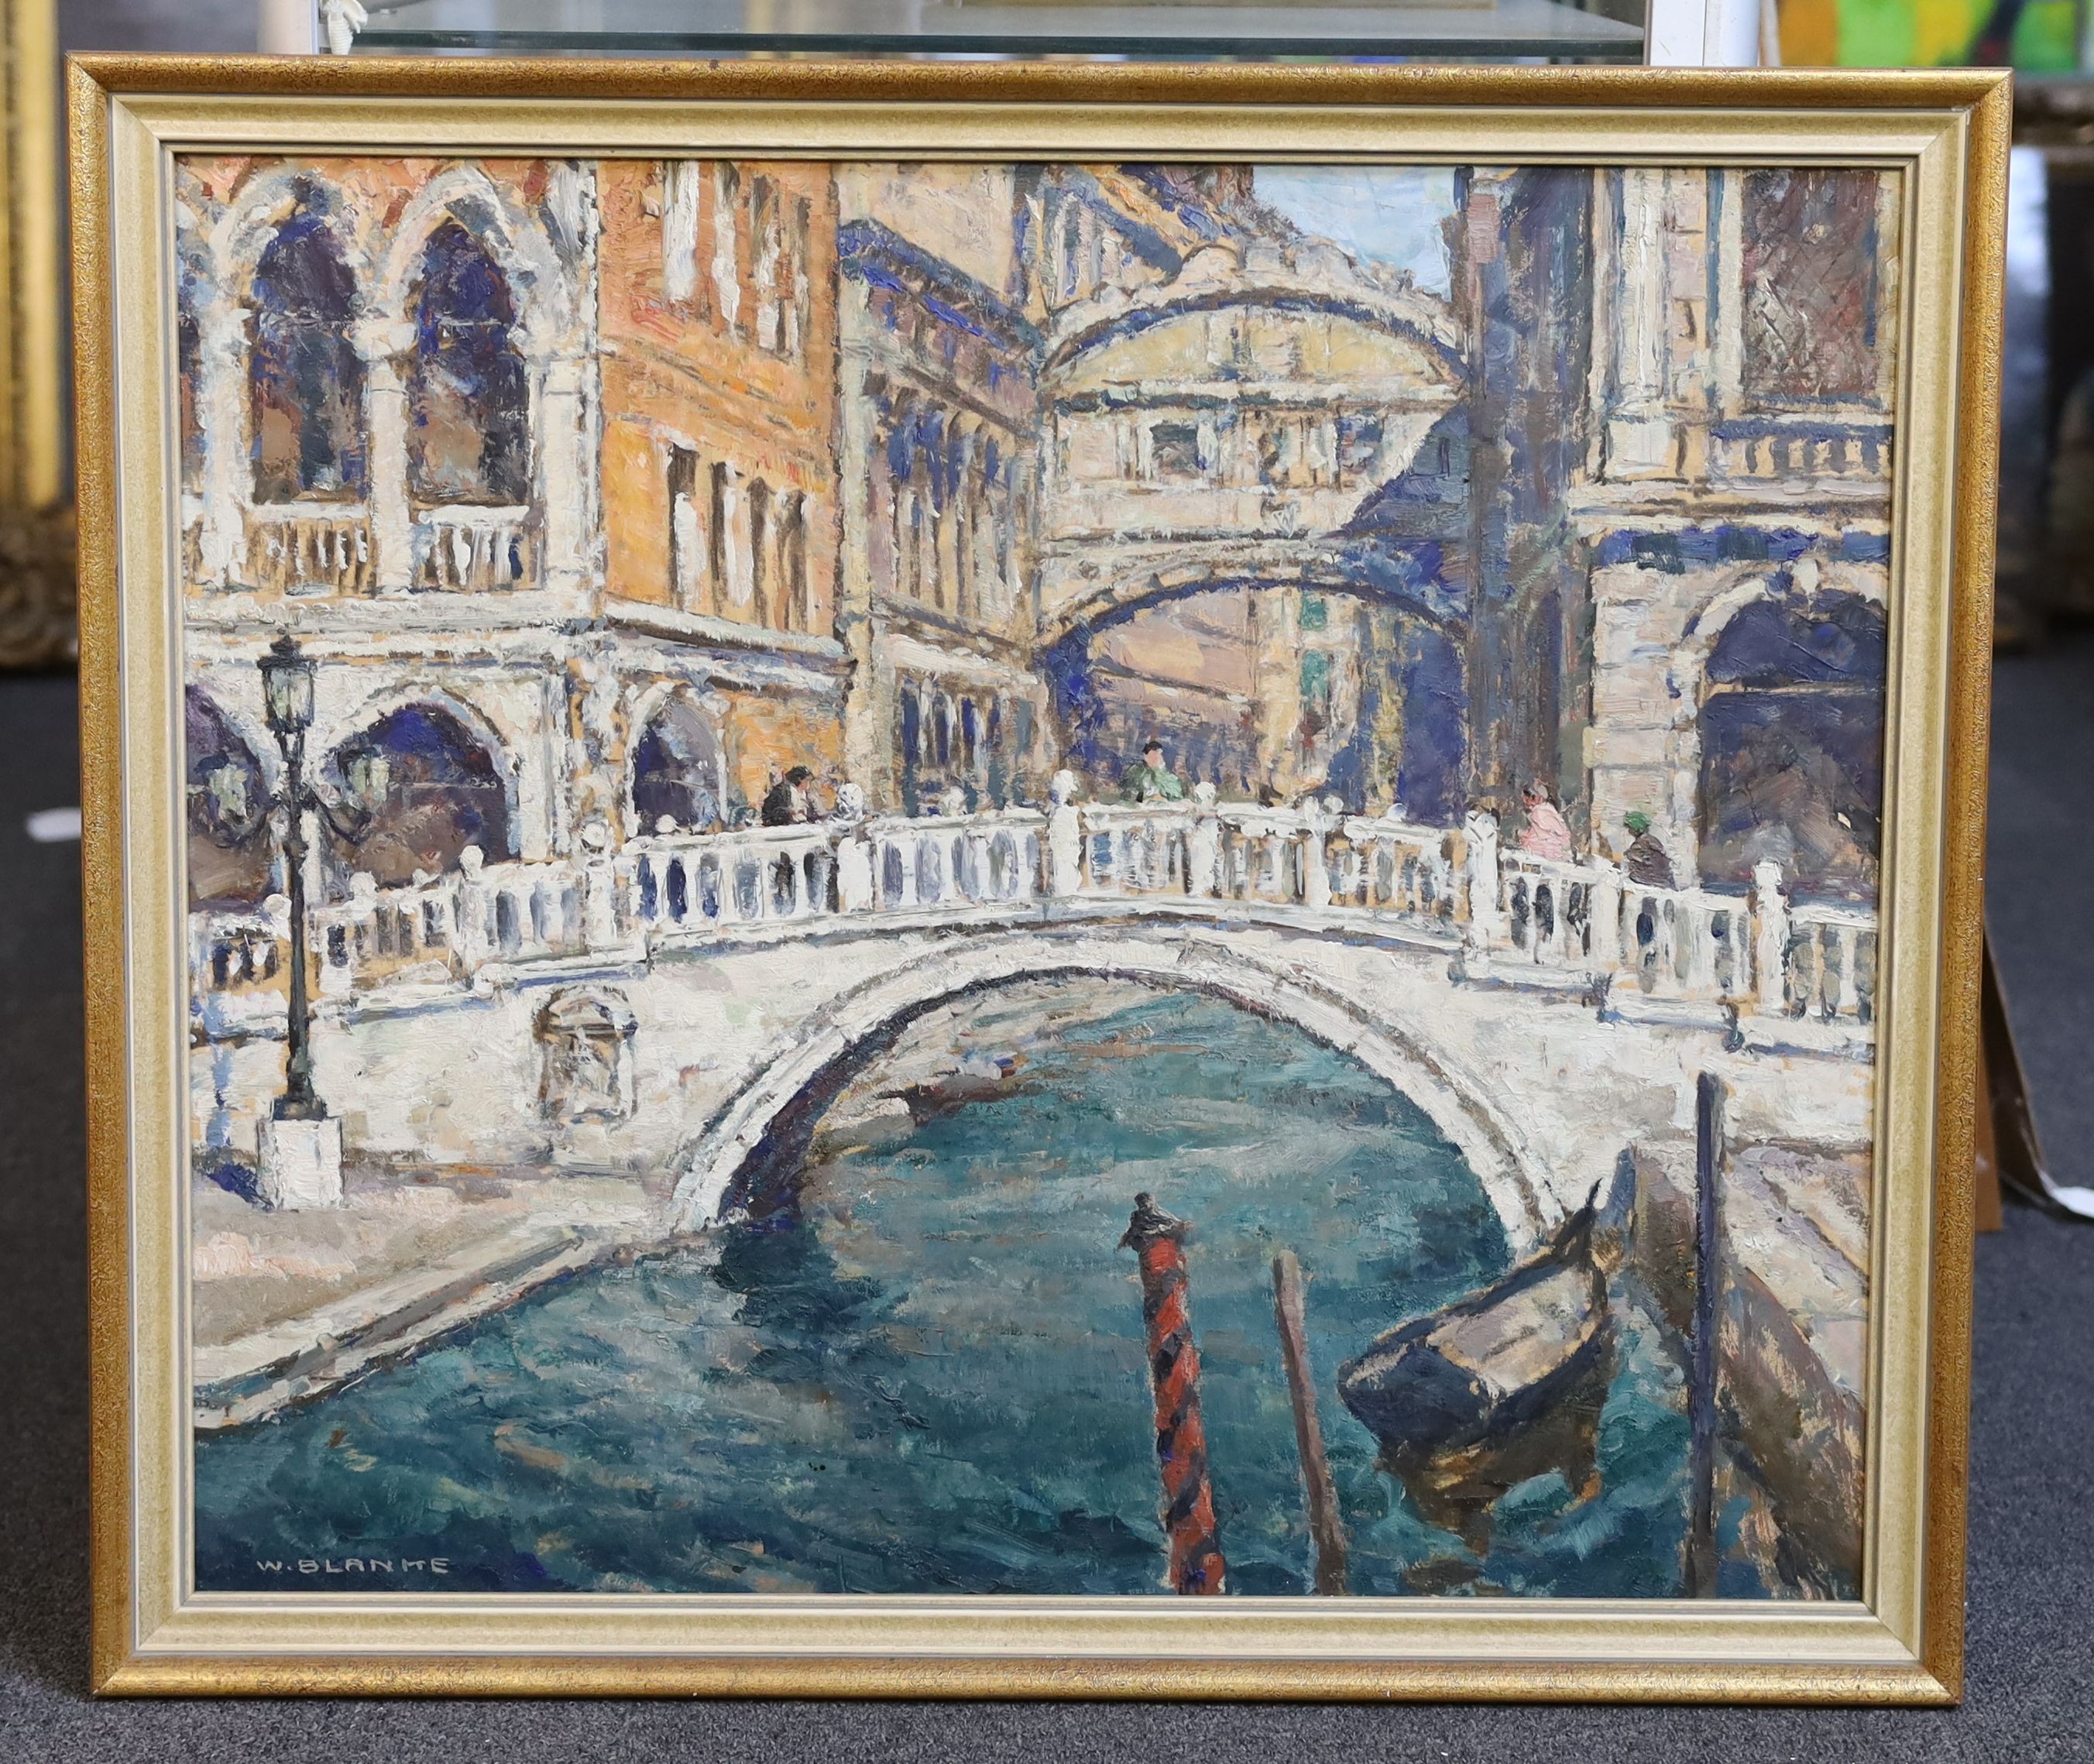 Wilhelm Blanke (German 1873-1943), Venice, the entrance to the Rio di Palazzo, the Bridge of Sighs beyond, oil on board, 58 x 68cm